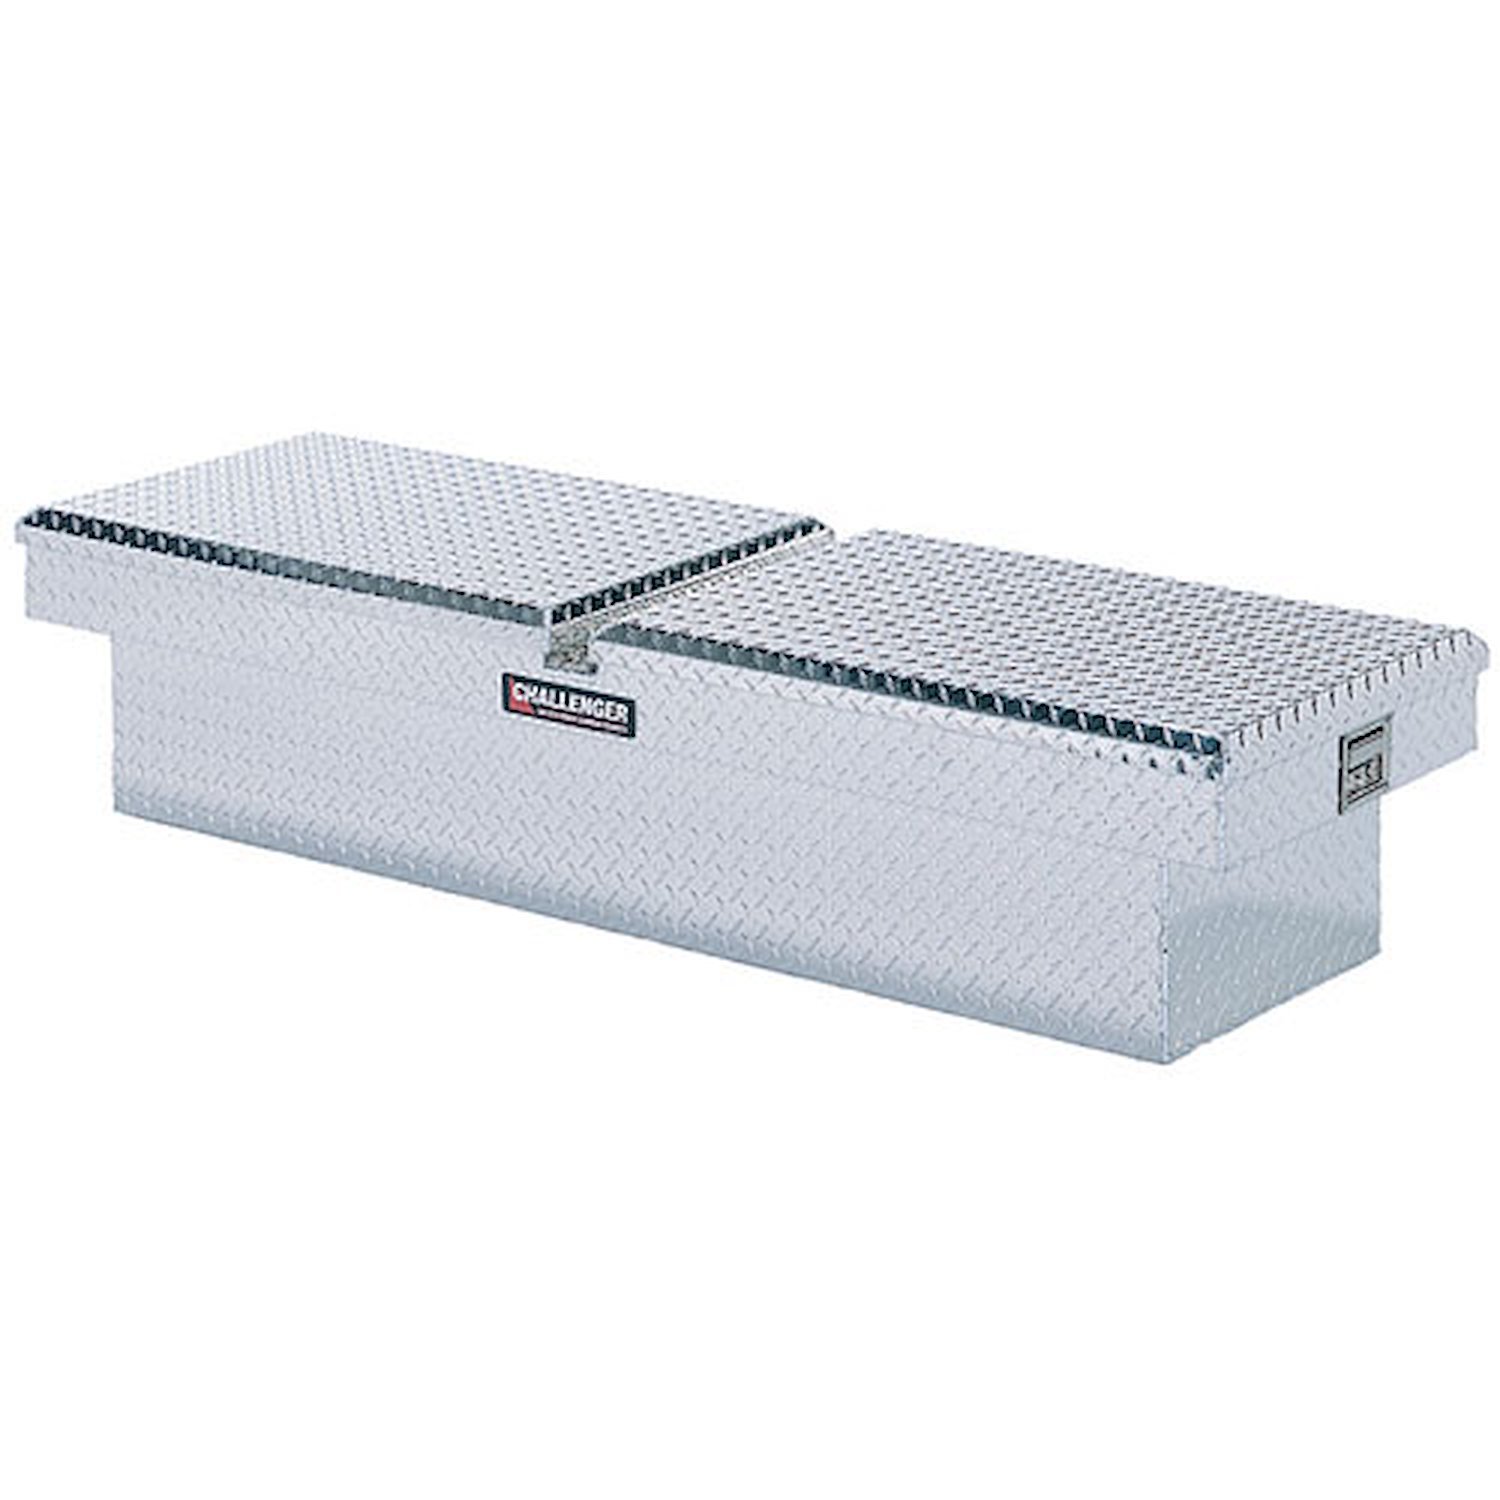 Truck Bed Challenger Tool Box Length: 70.25"